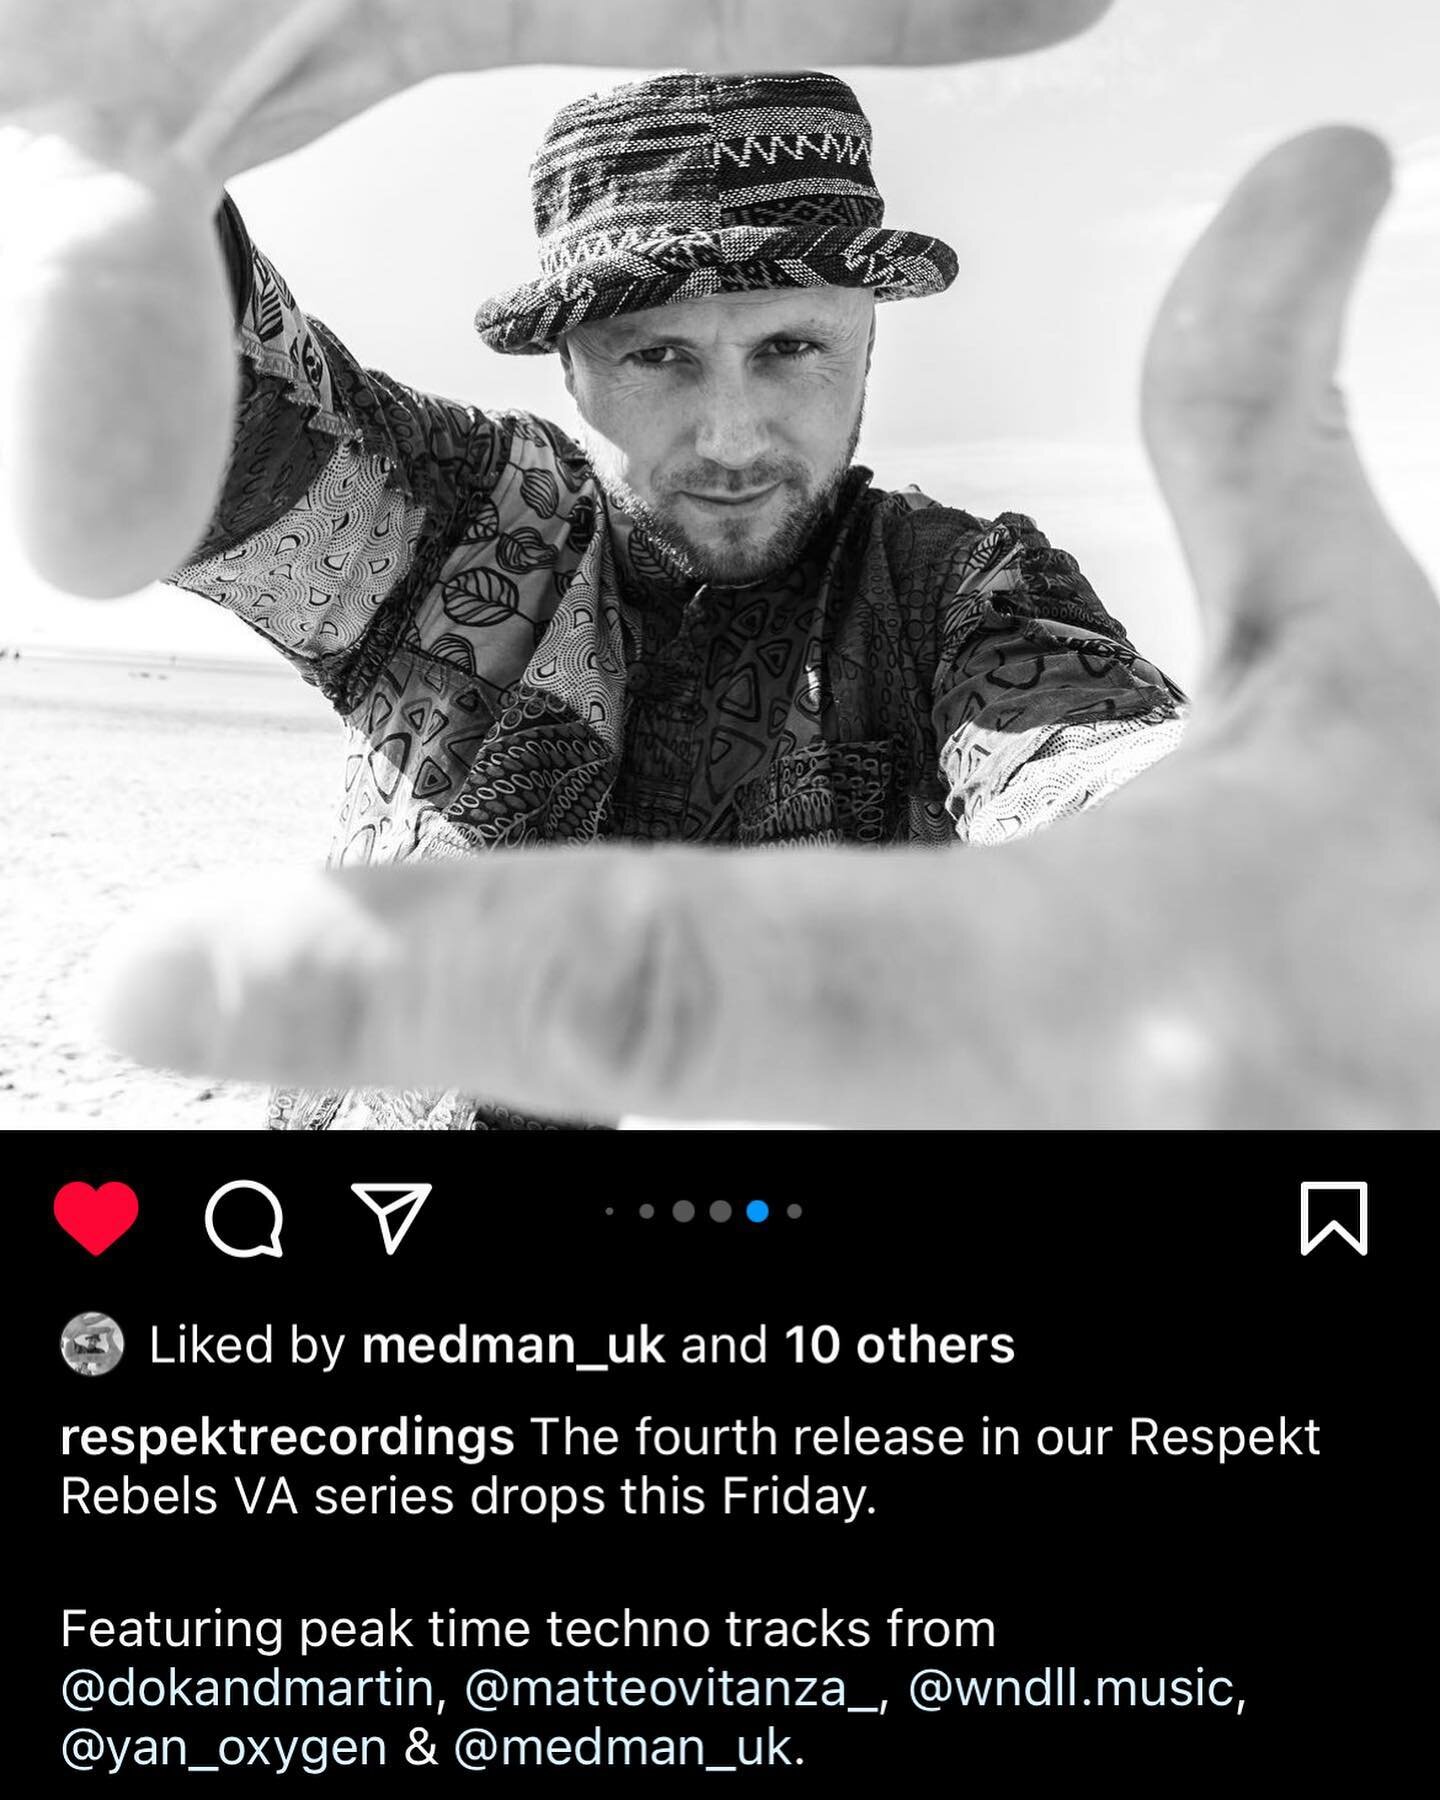 Please check out my page @medman_uk if you&rsquo;re interested in following my Dj journey&hellip; my latest release comes out on the mighty @respektrecordings this Friday 🙌🎶